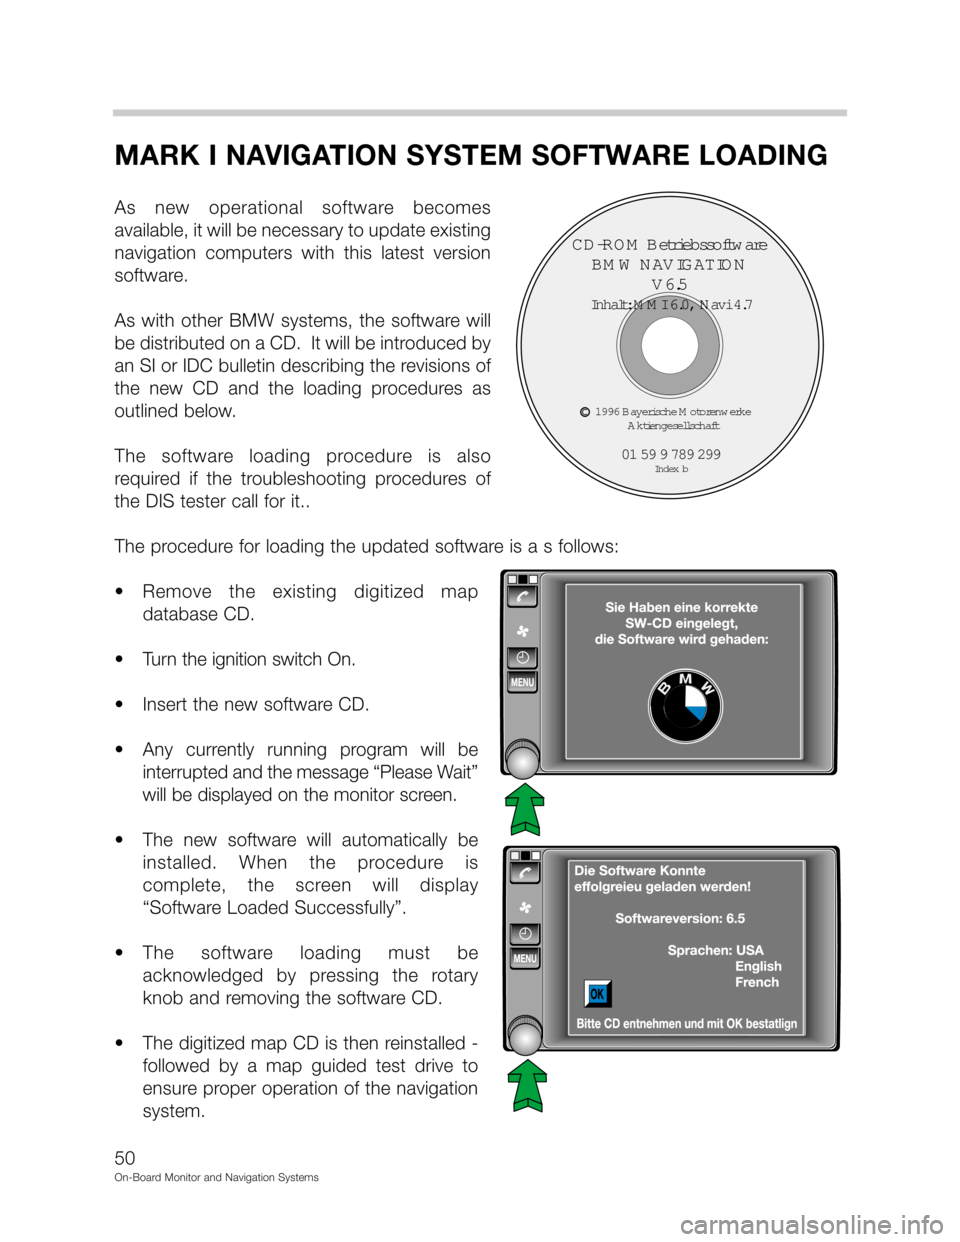 BMW 7 SERIES 1998 E38 On Board Monitor System Service Manual 	>
4
8

	5@3
8
 
% 

 % 	
&6%




&
 	
 %   &
%
 